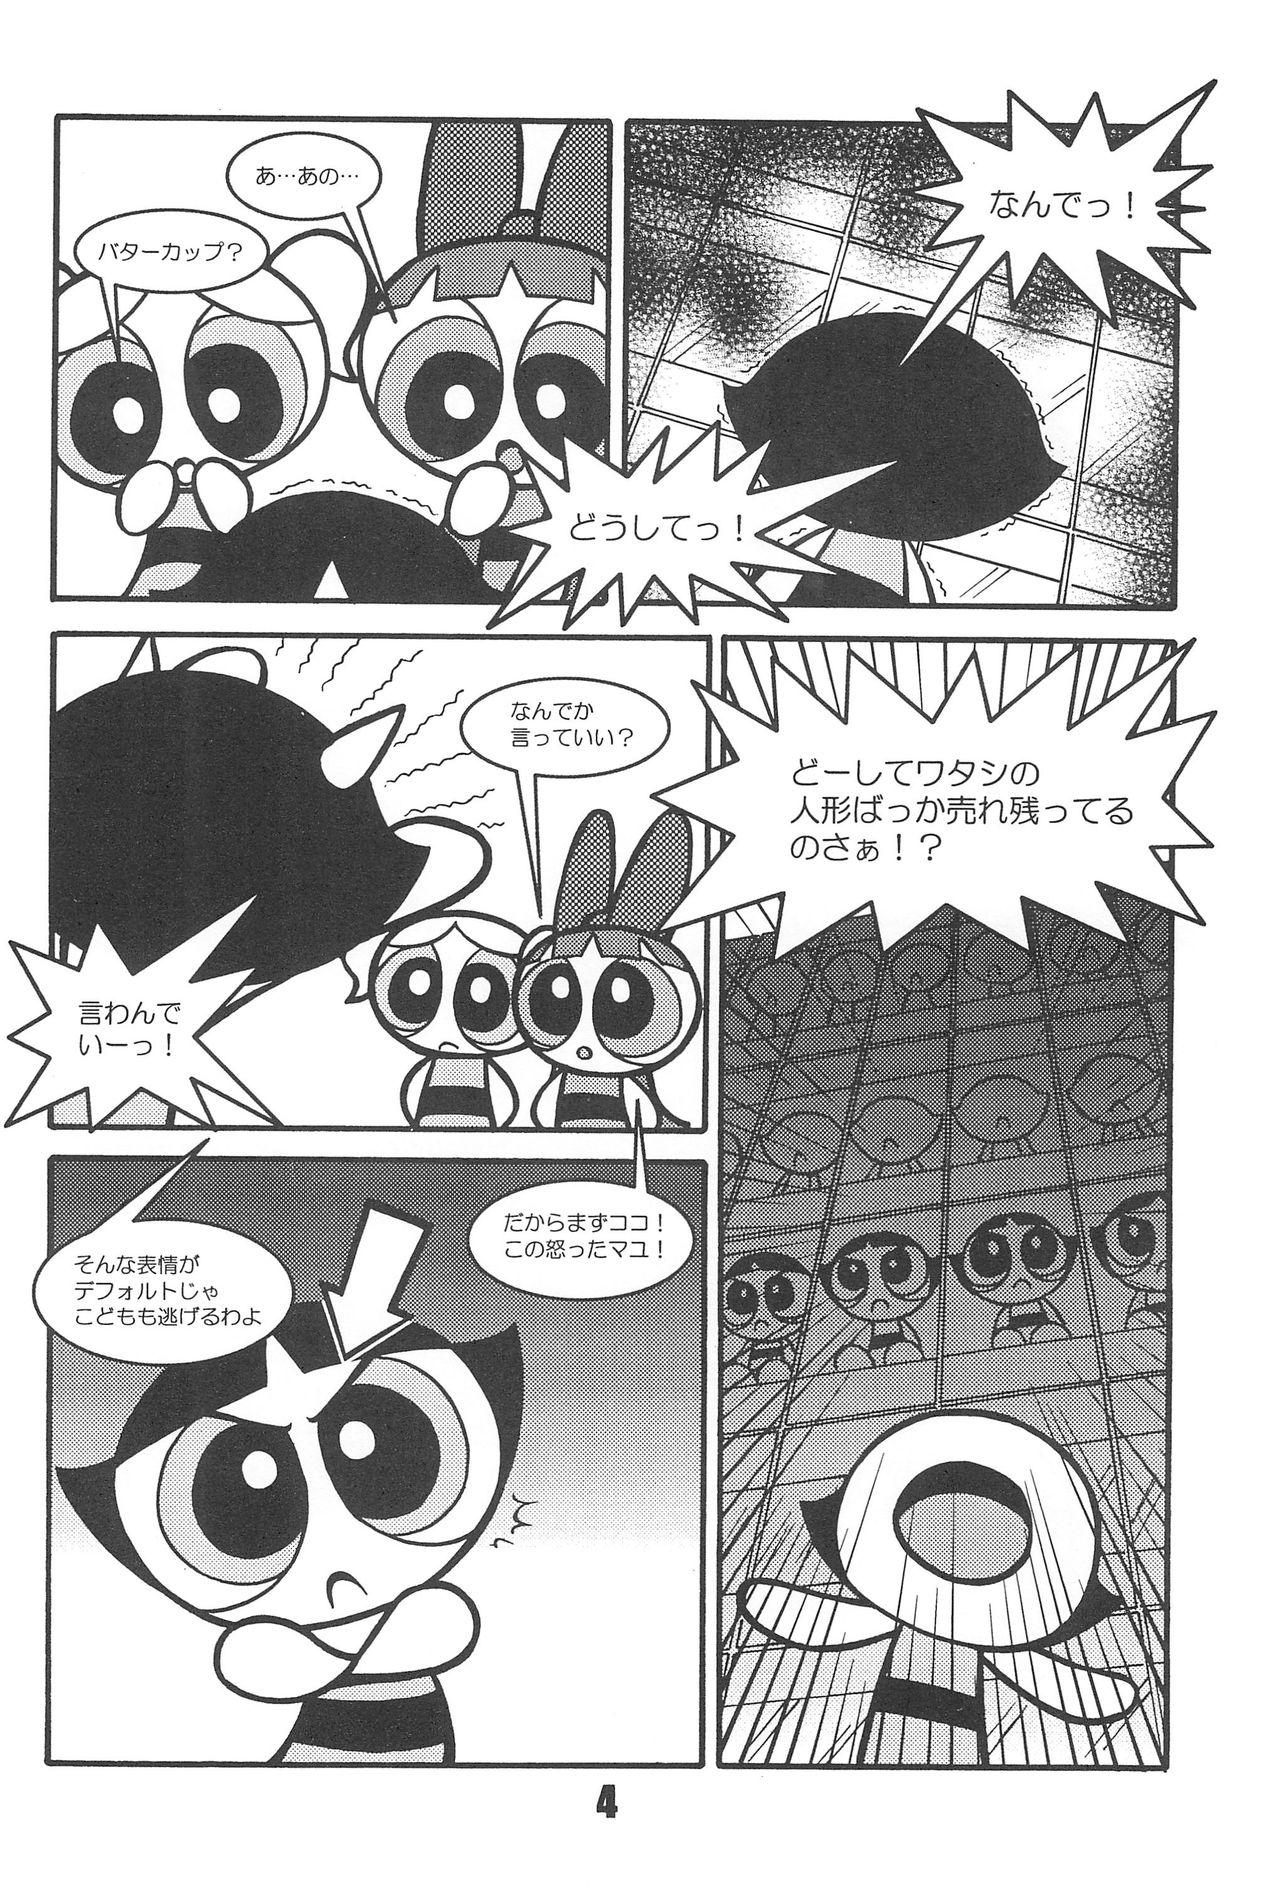 Spy Show Goes On! Funhouse 22th - The powerpuff girls Ameture Porn - Page 4